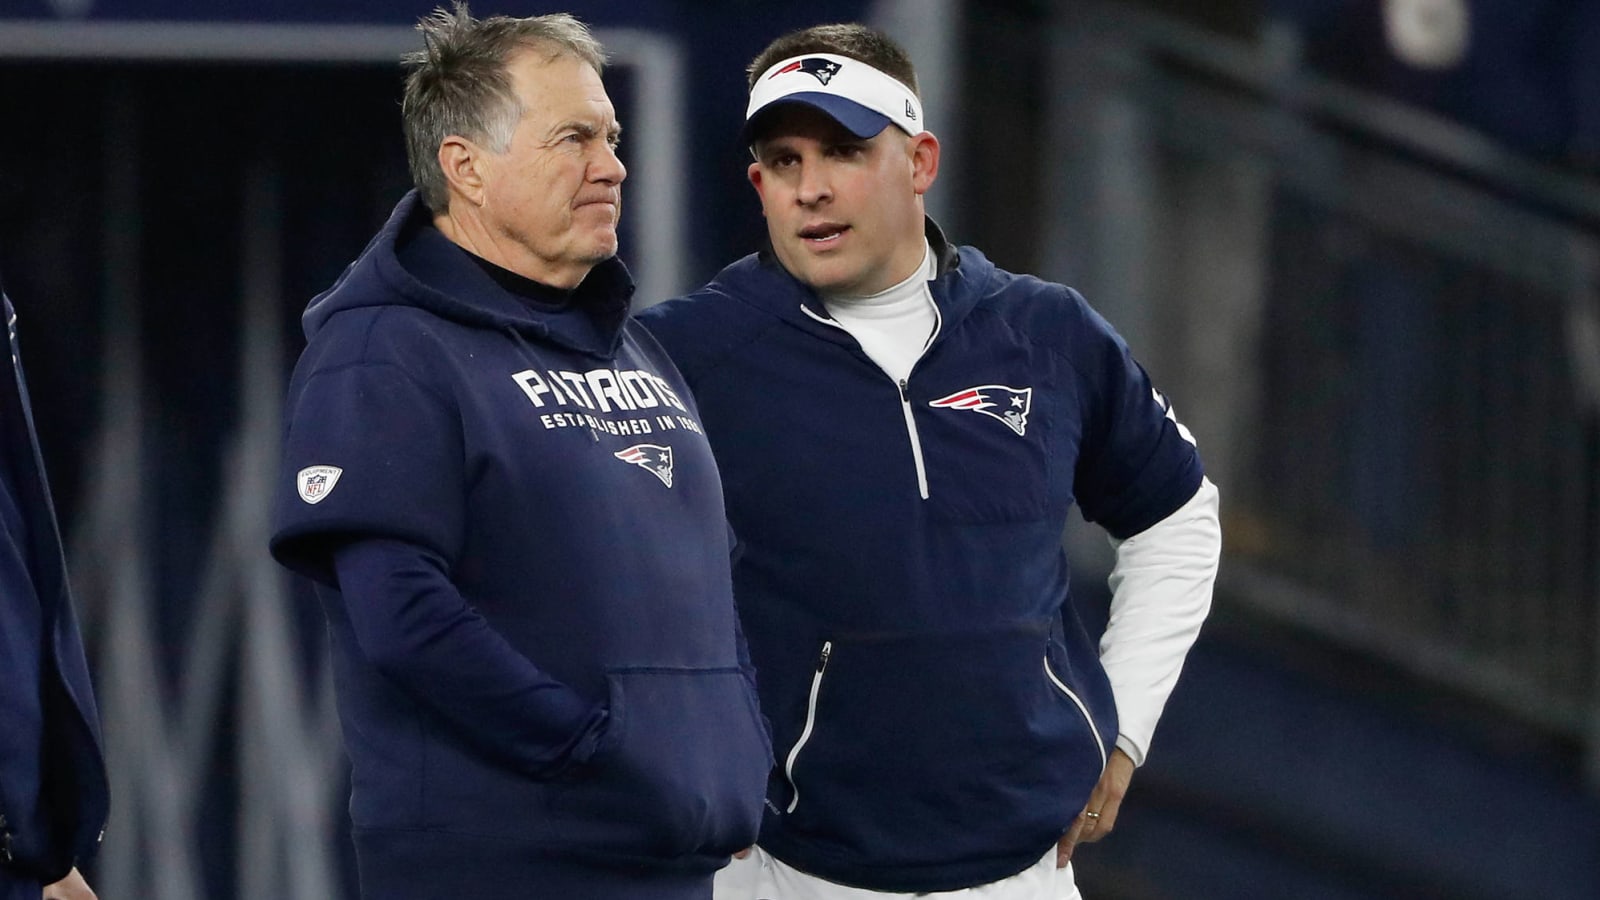 Josh McDaniels unlikely to become head coach in 2021?